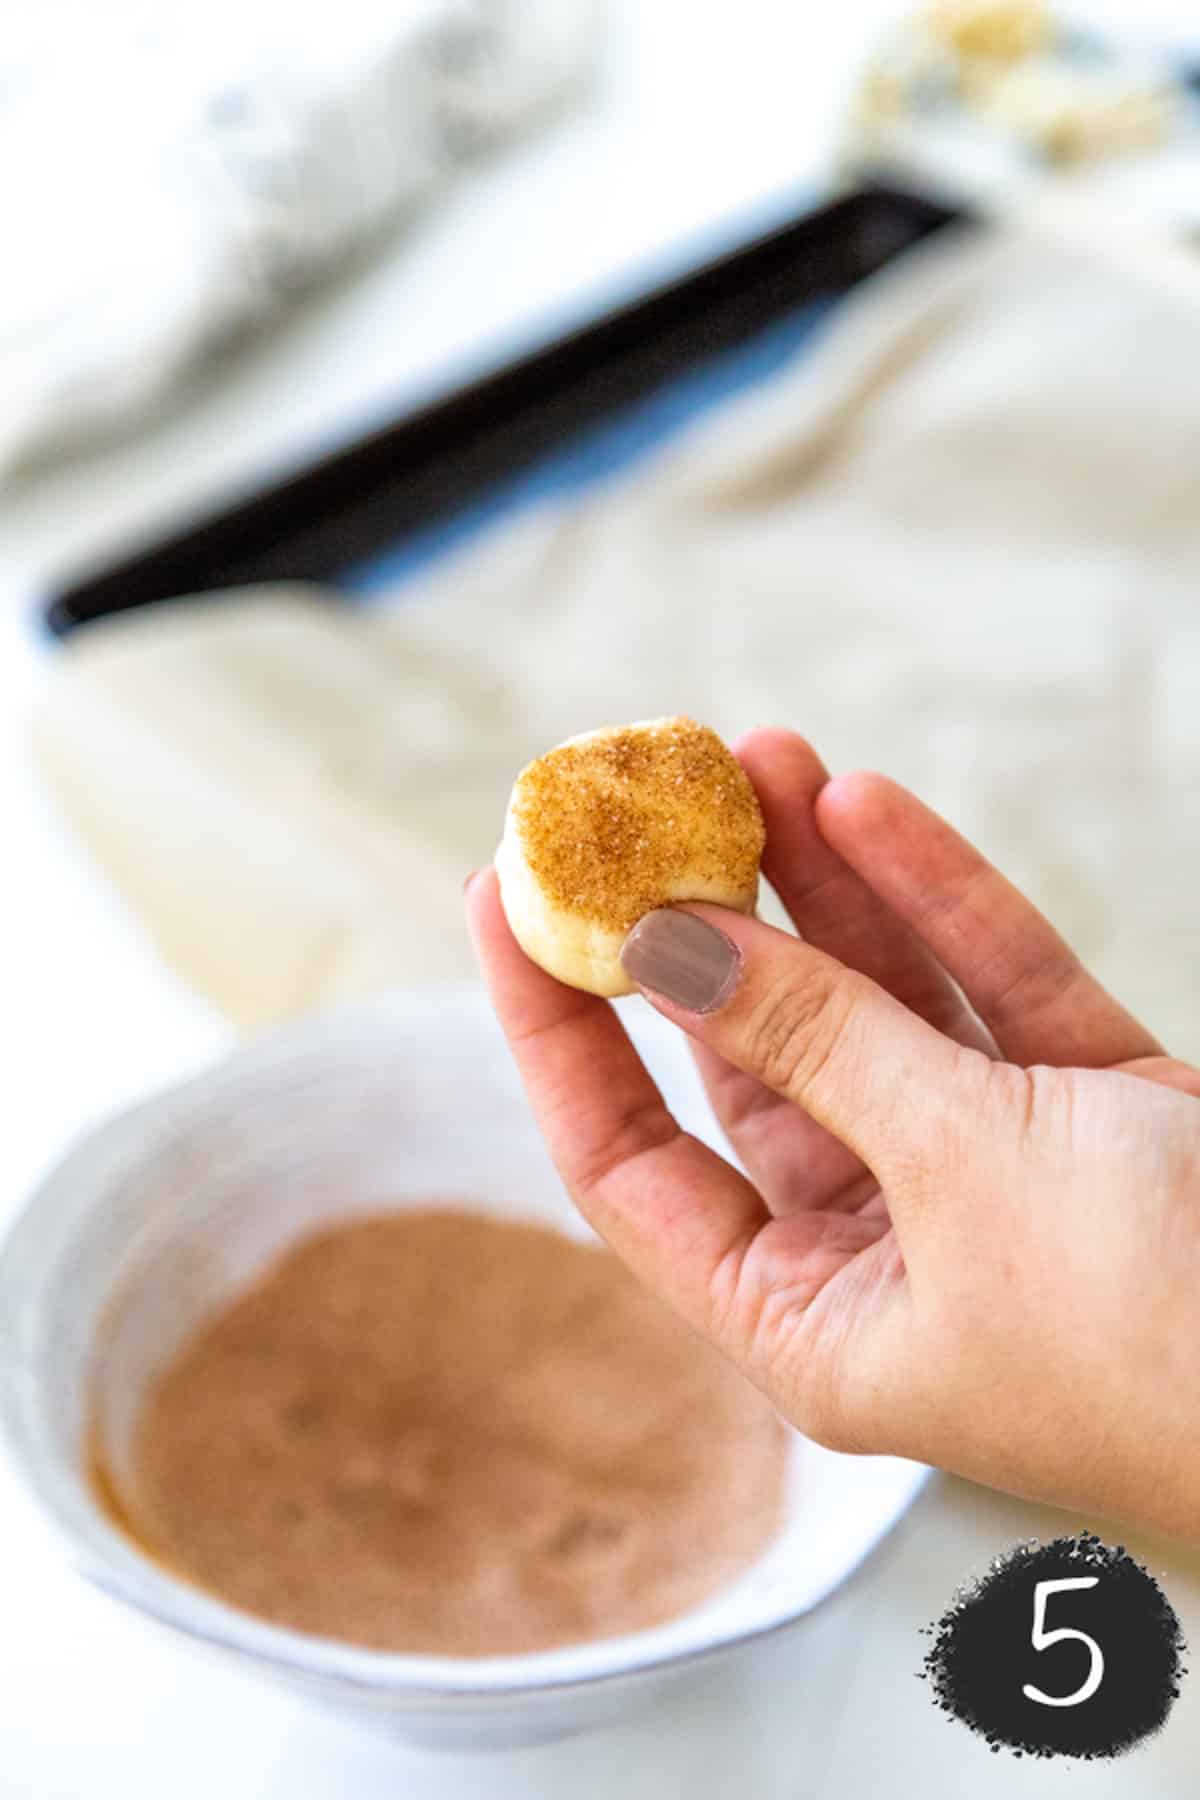 A hand holding a cookie dough ball covered in cinnamon sugar.